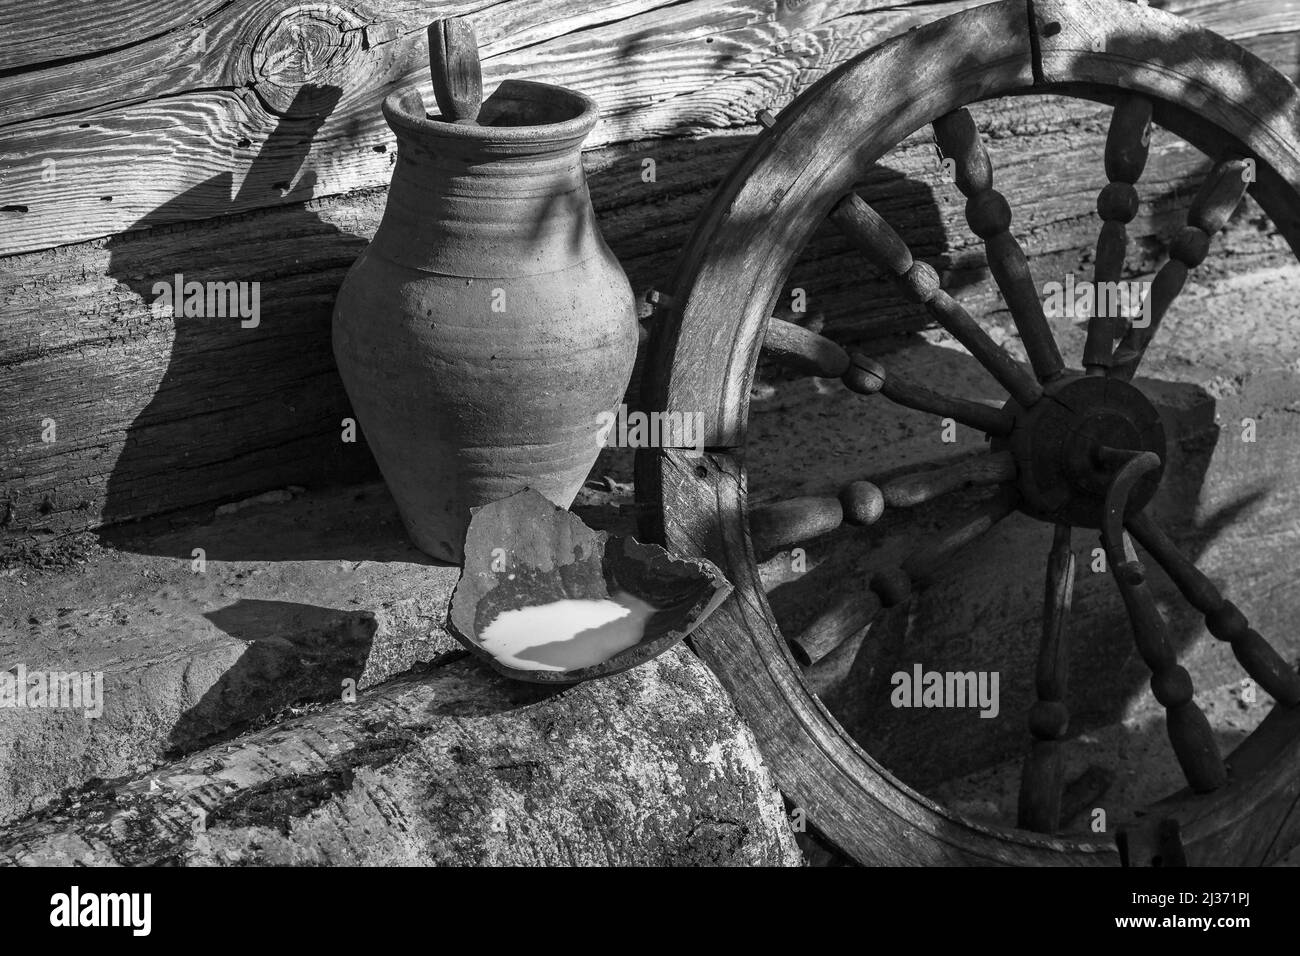 Rustic still life of old items, jug and old wheel on a wooden wall background Stock Photo